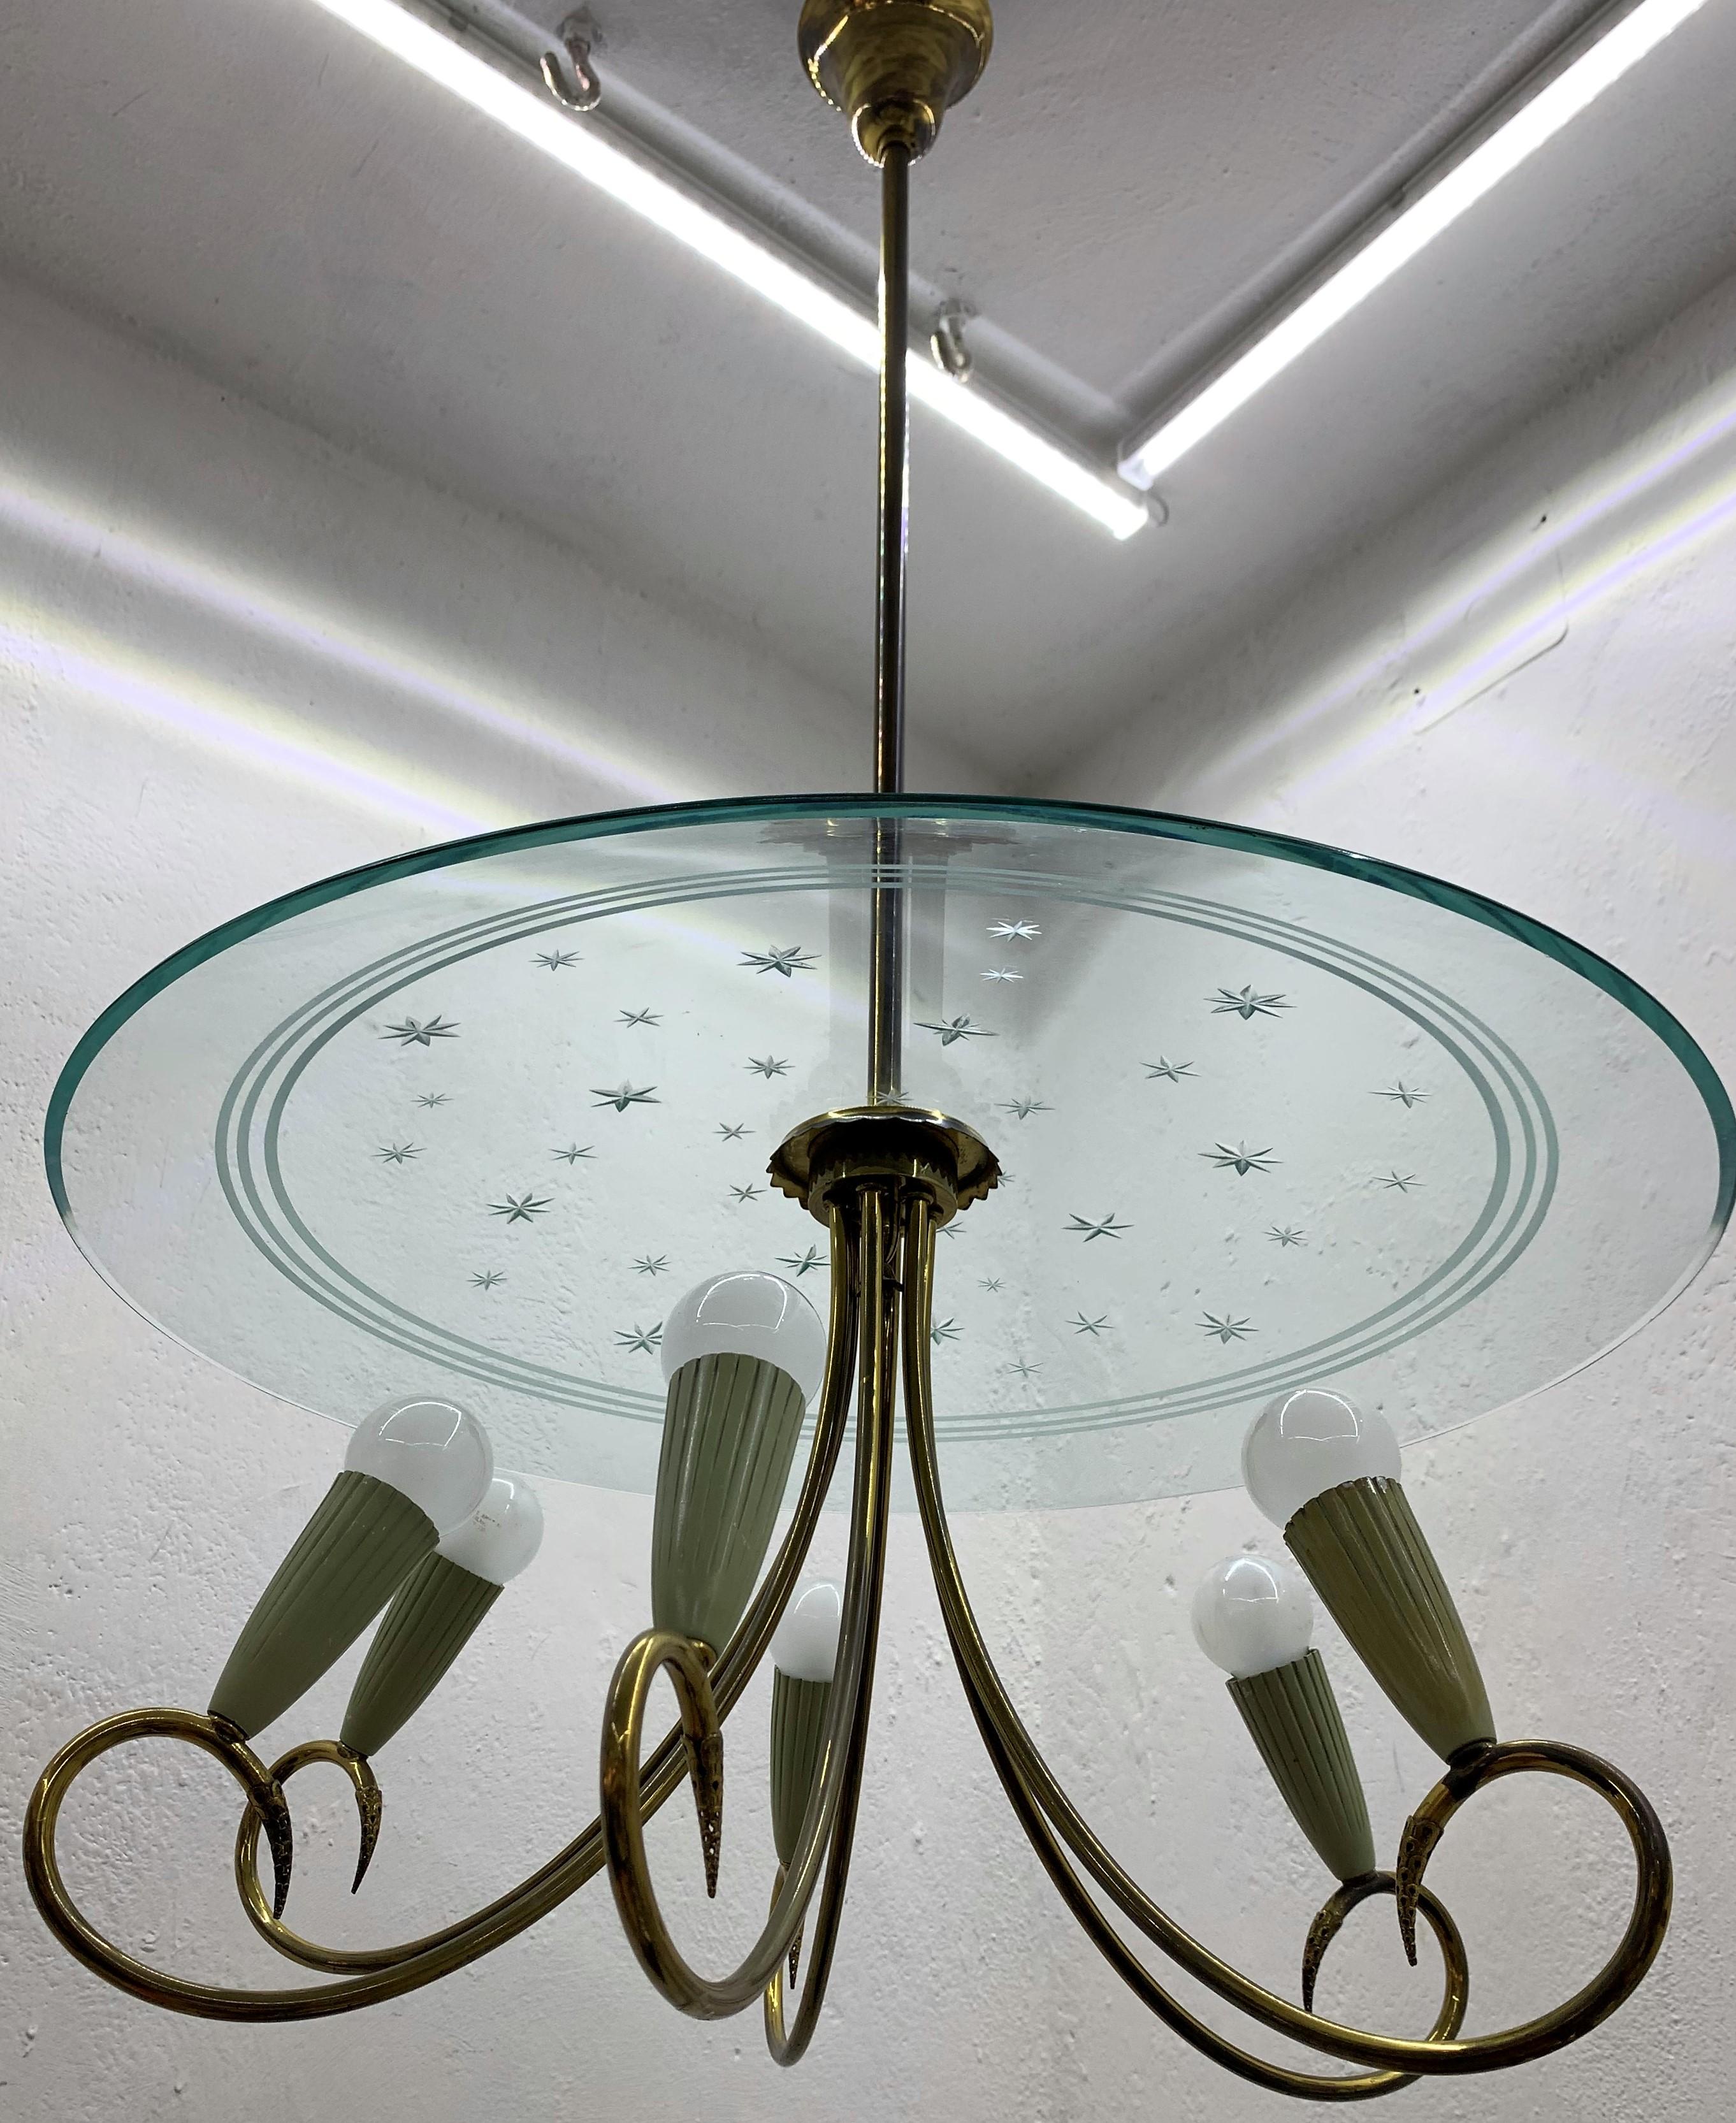 Mid-20th Century Mid-Century Modern Chandelier Attributed to Fontana Arte, Italy, circa 1950 For Sale